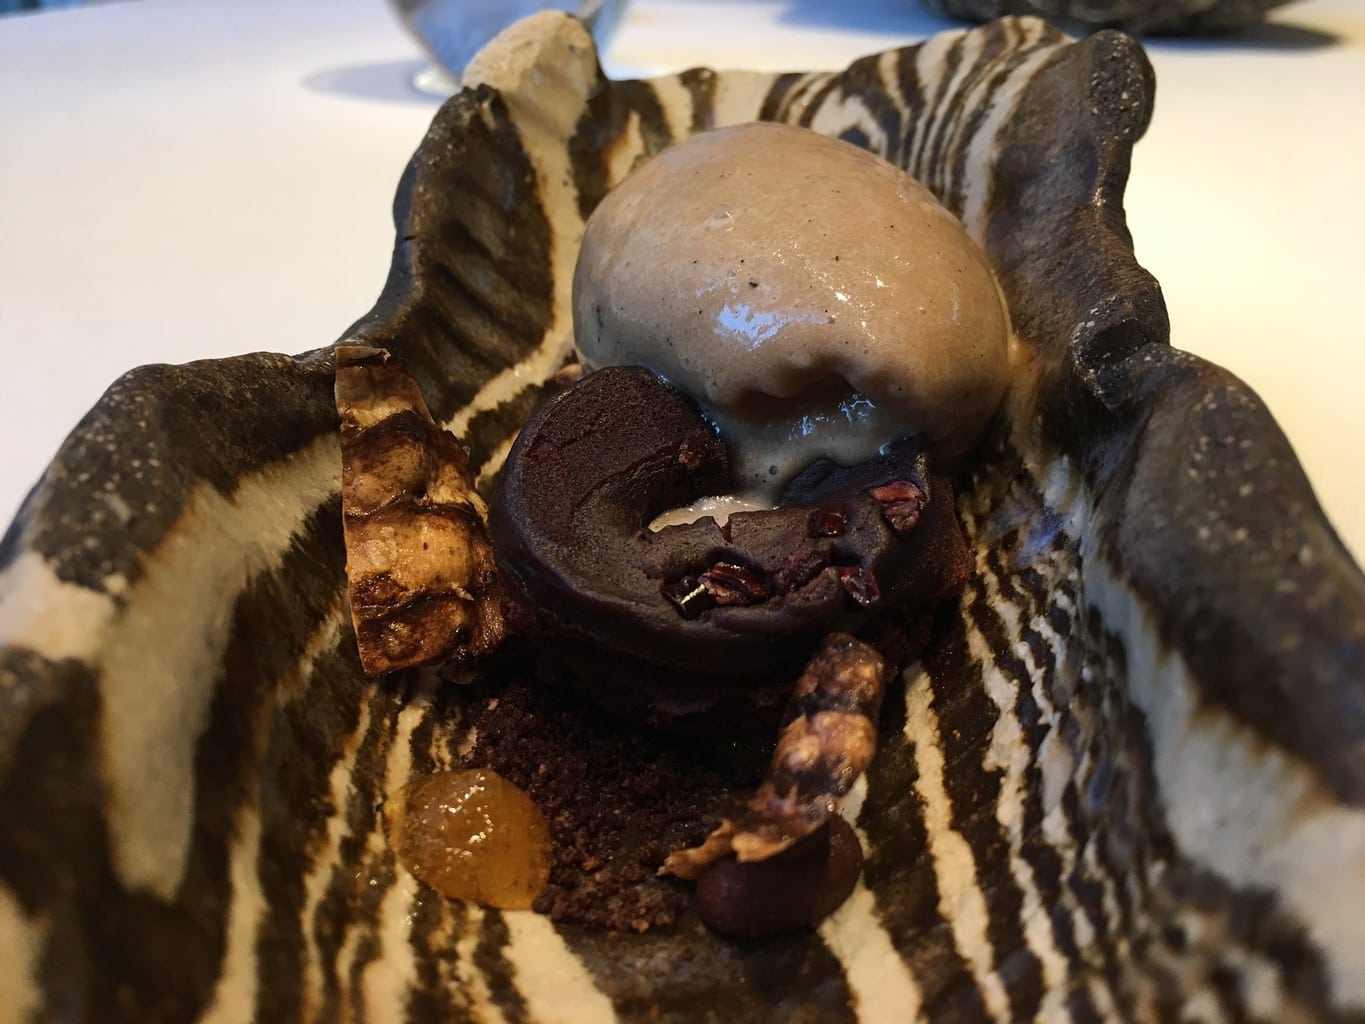 Infused and frozen wood and bark with vanilla, chocolate, species, treacle and resin at AbaC